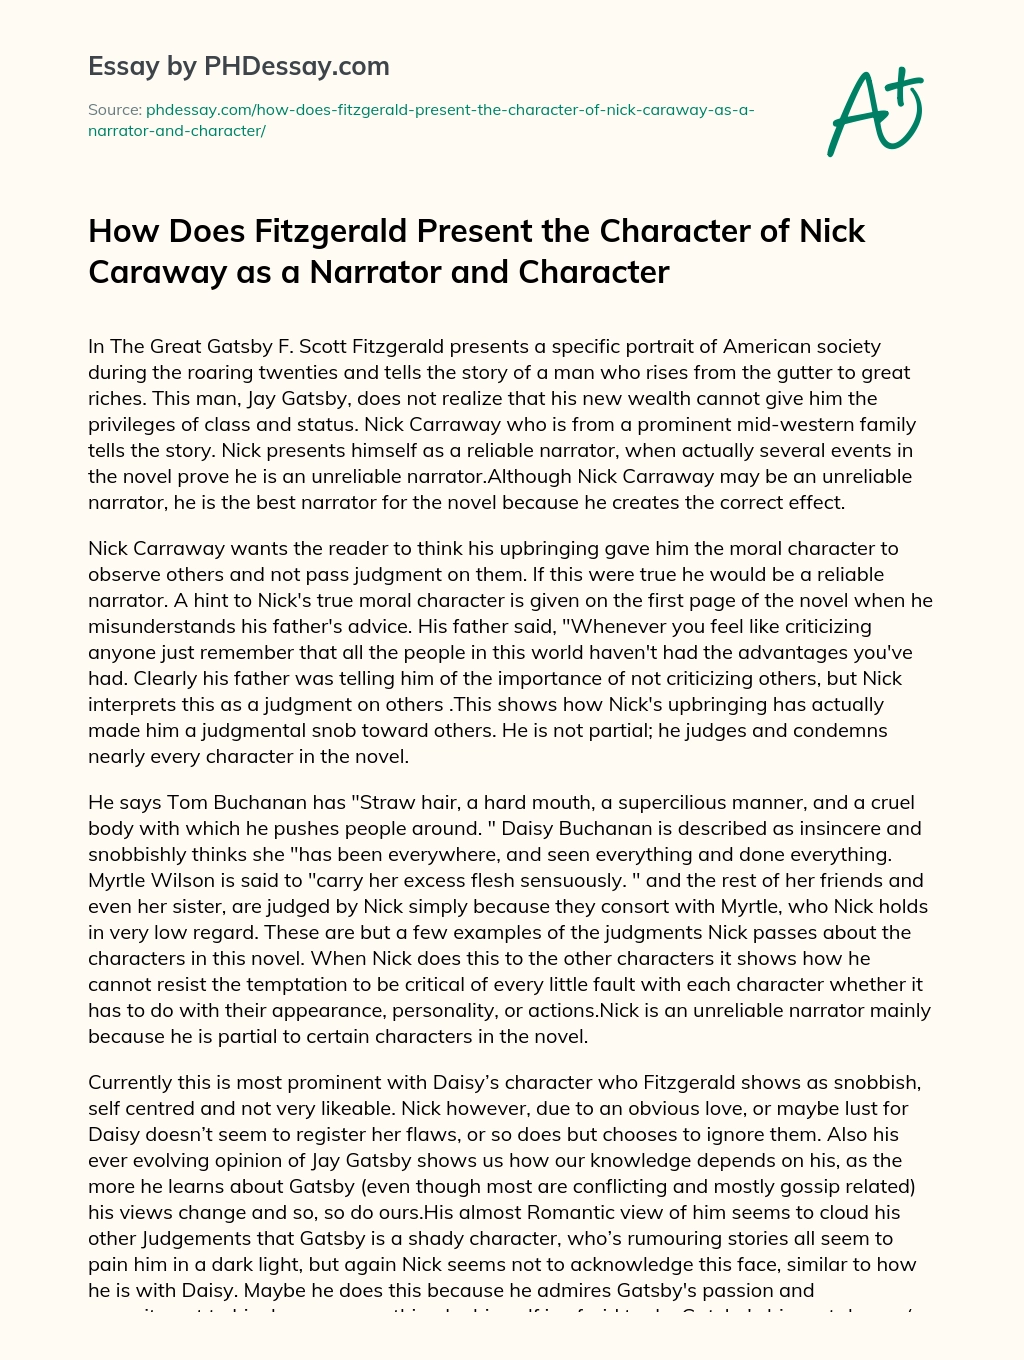 How Does Fitzgerald Present the Character of Nick Caraway as a Narrator and Character essay